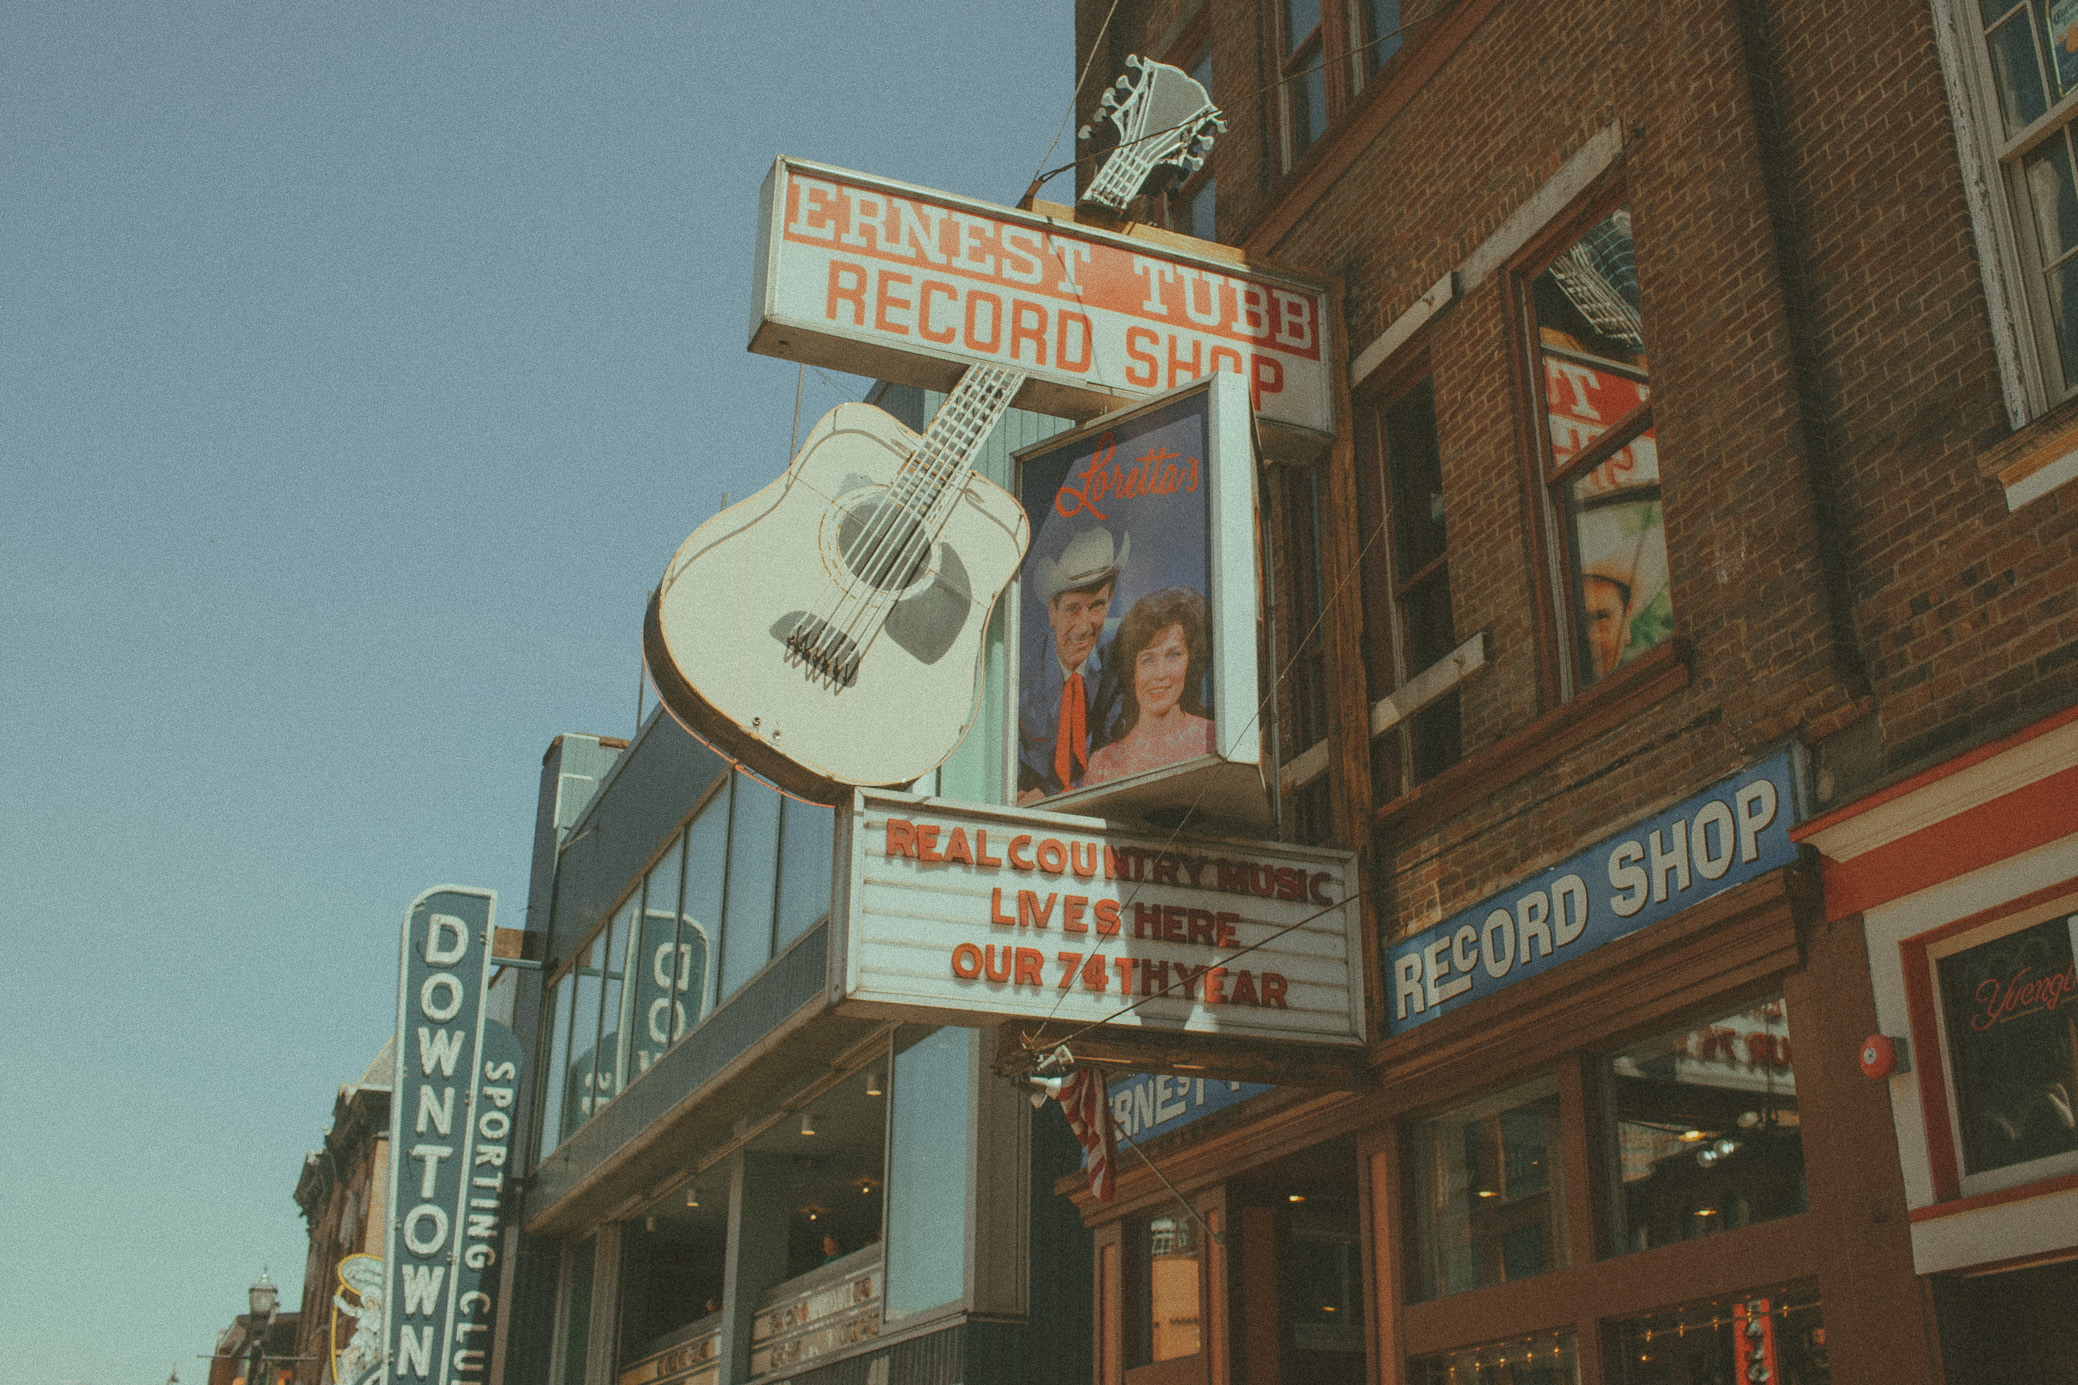 Ernest Tubb Record Shop | Nashville, Tennessee | May 1st, 2021